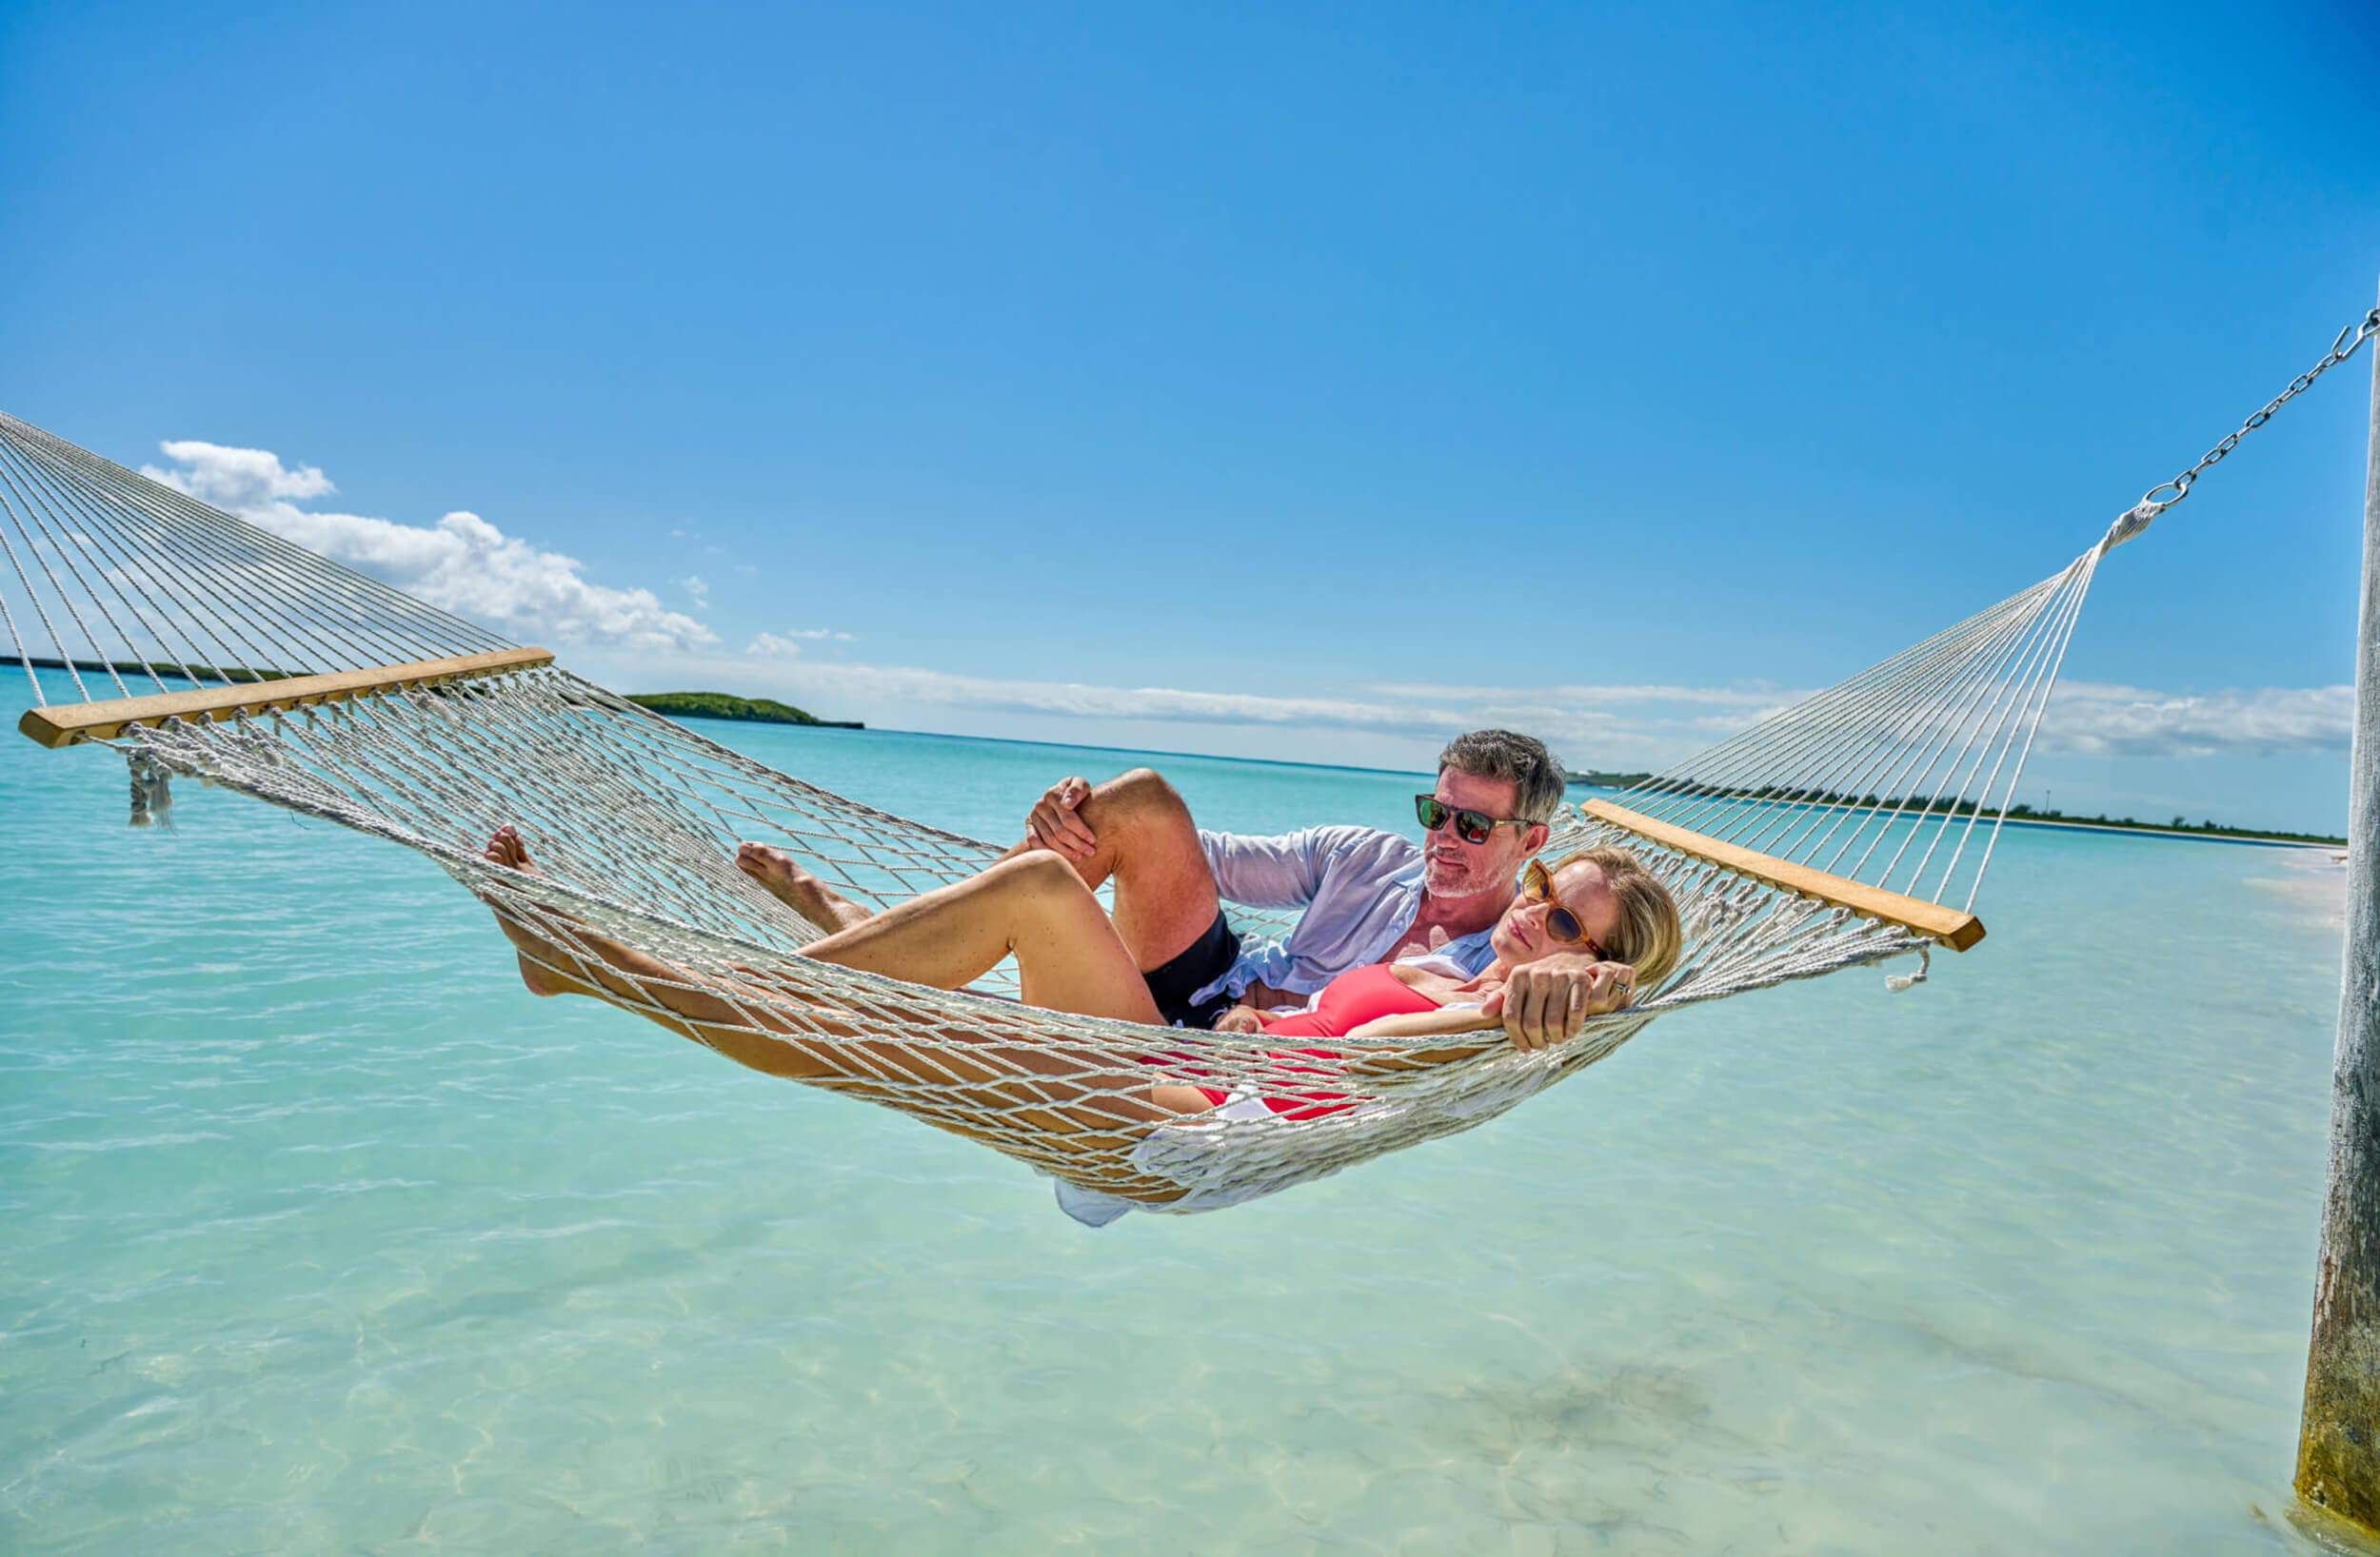 Couple relaxing in a hammock over the water, enjoying the serene coastal living at The Abaco Club